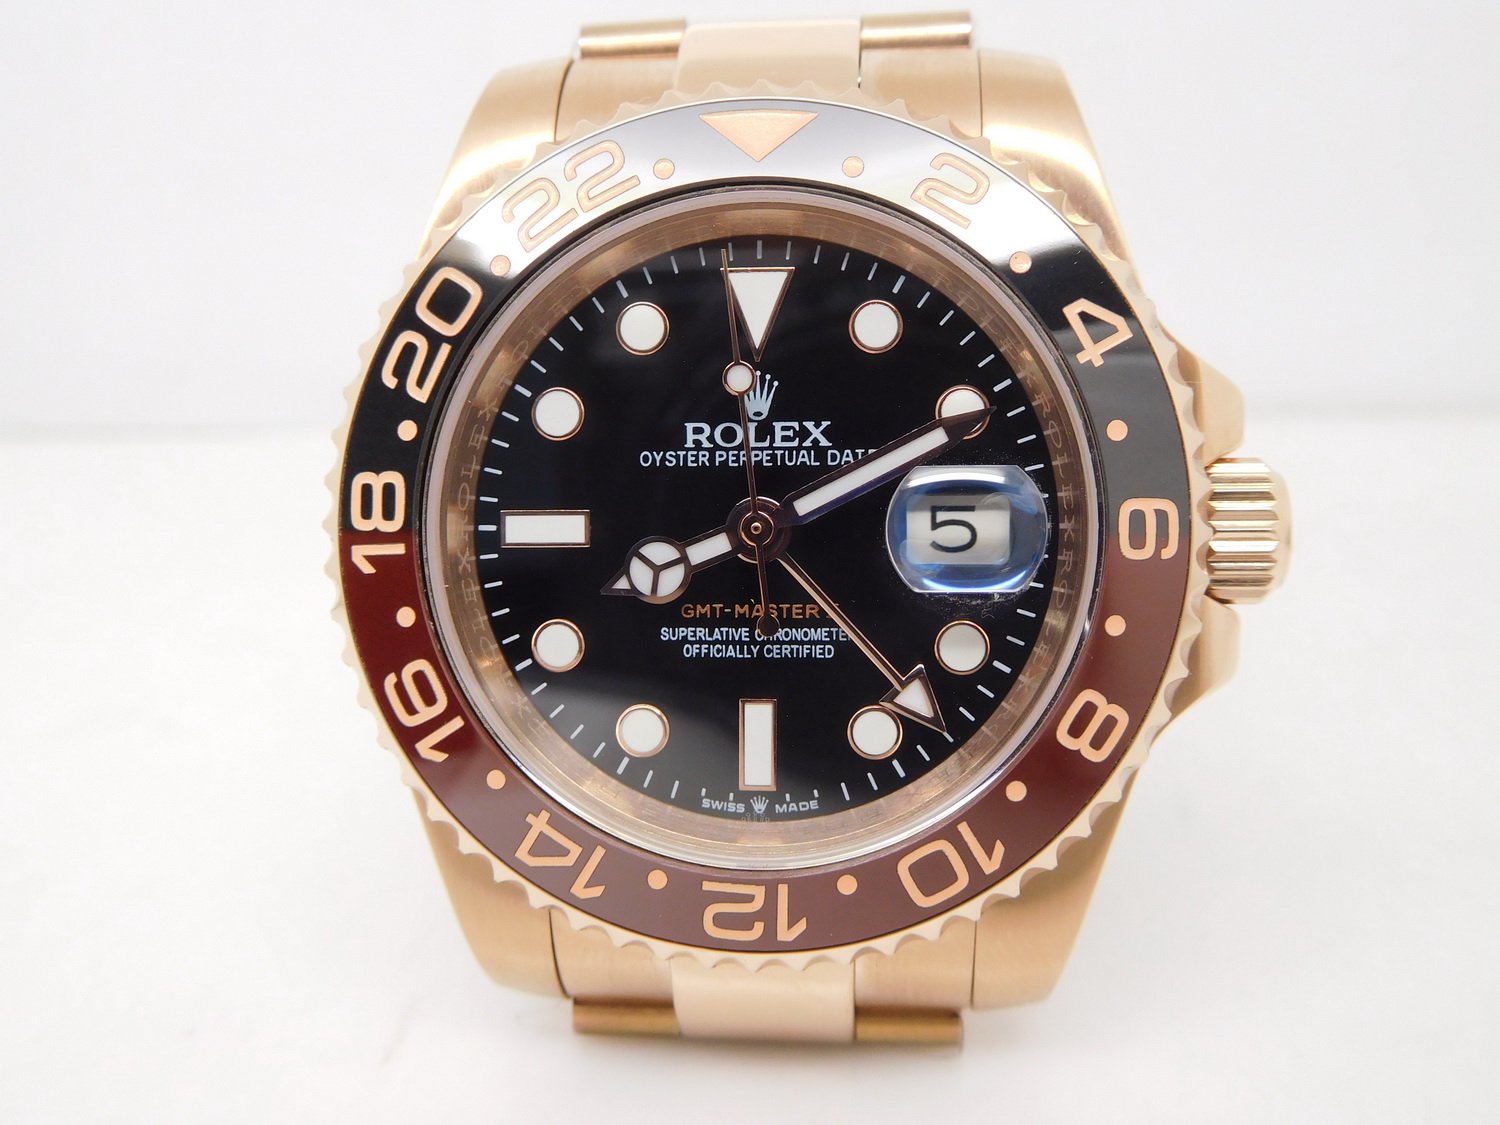 Replica Rolex GMT Master II Basel 2018 126715 Rose Gold Watch with Black/Brown Ceramic Bezel 